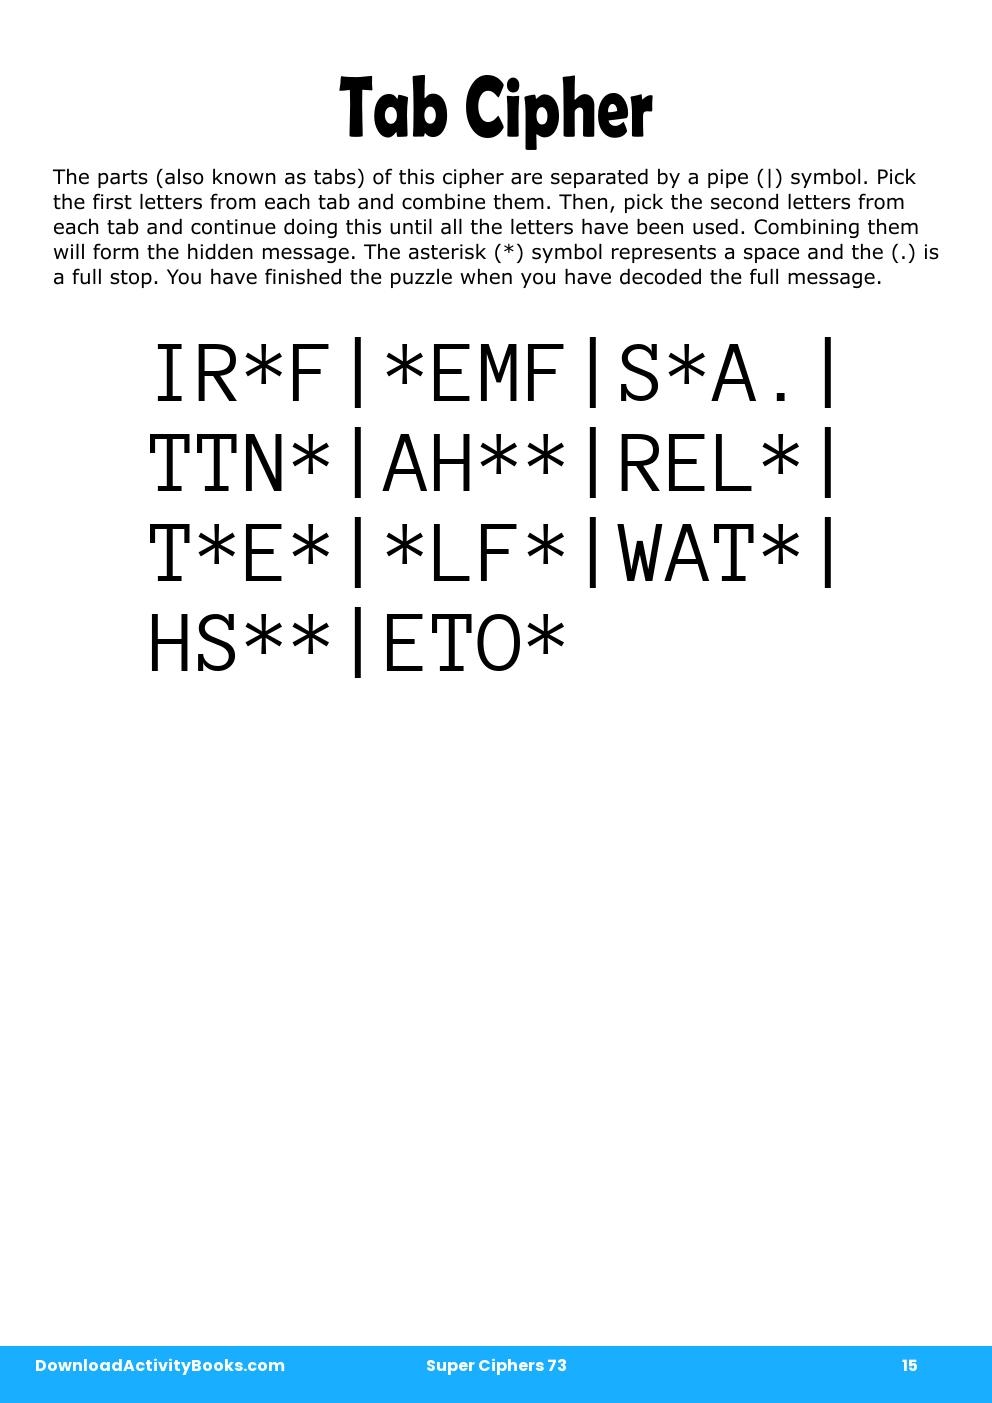 Tab Cipher in Super Ciphers 73